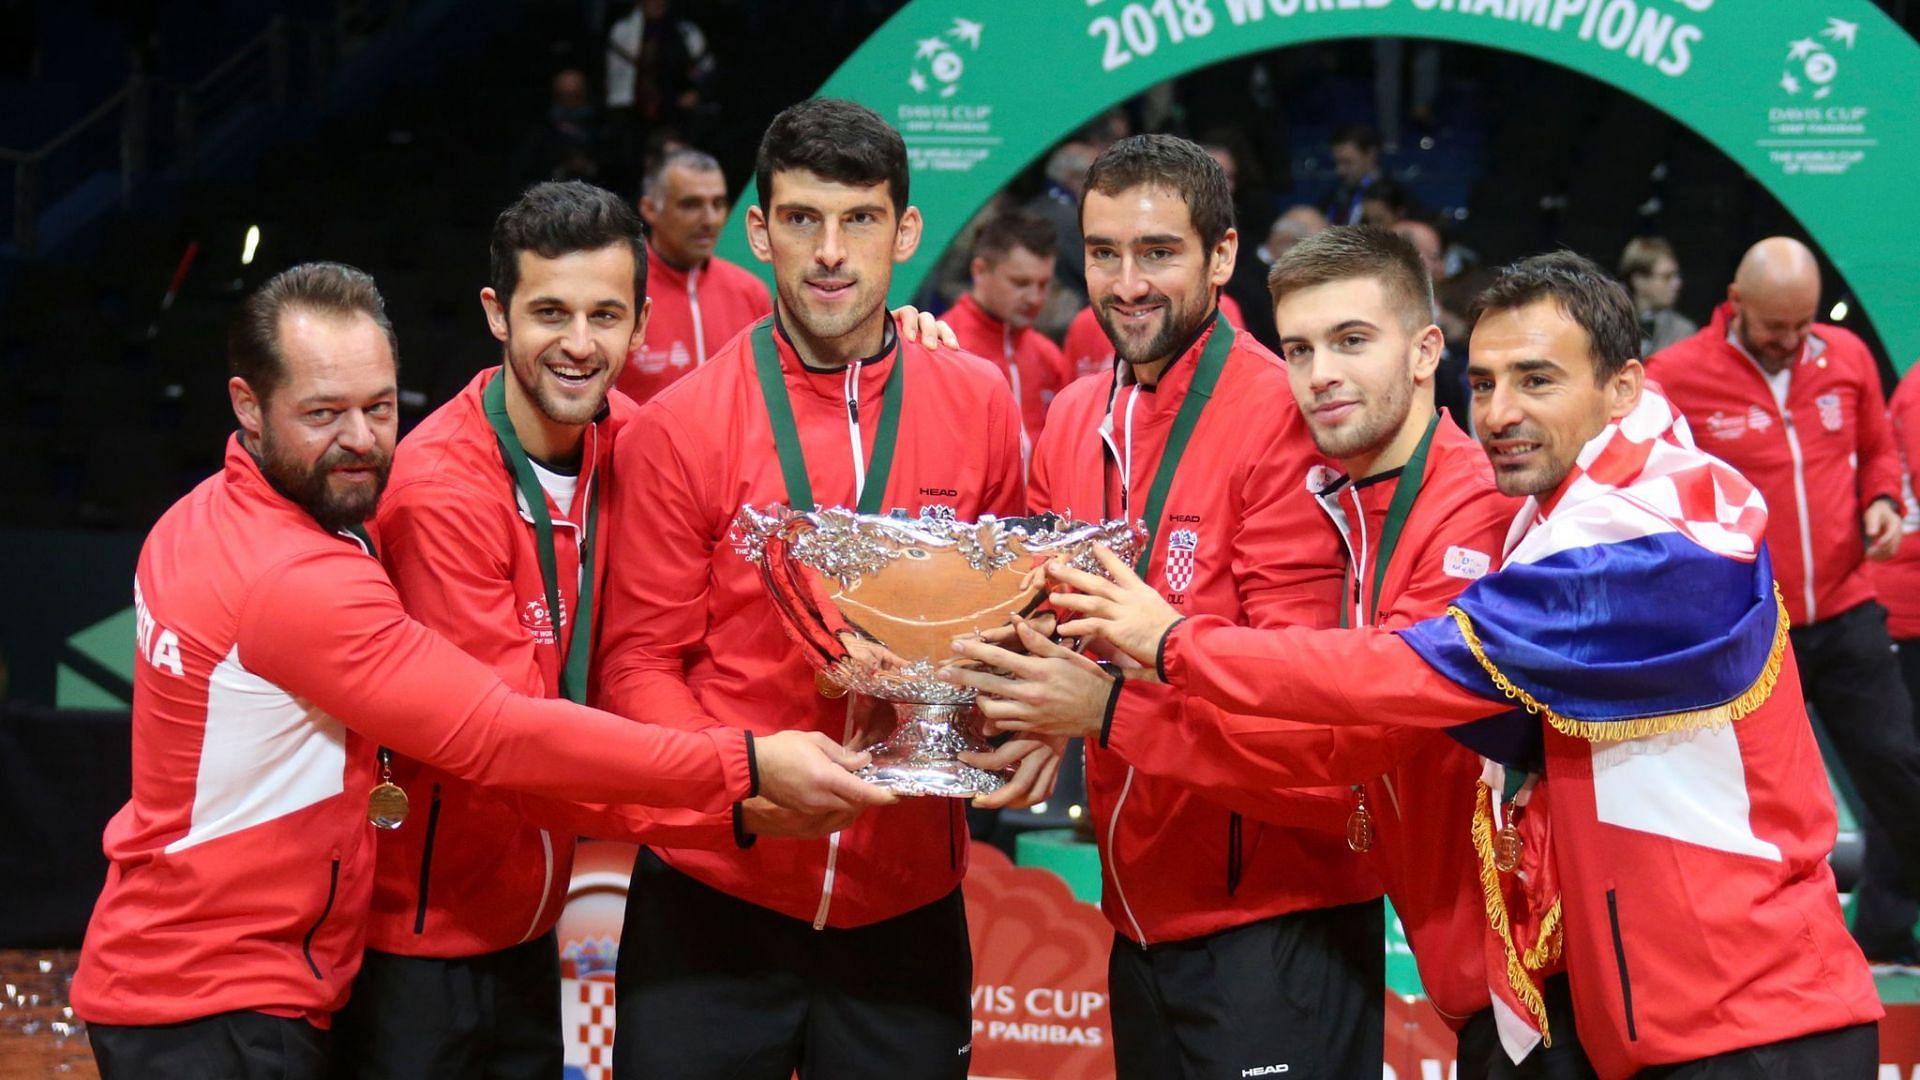 Marin Cilic led Croatia to victory at the 2018 Davis Cup